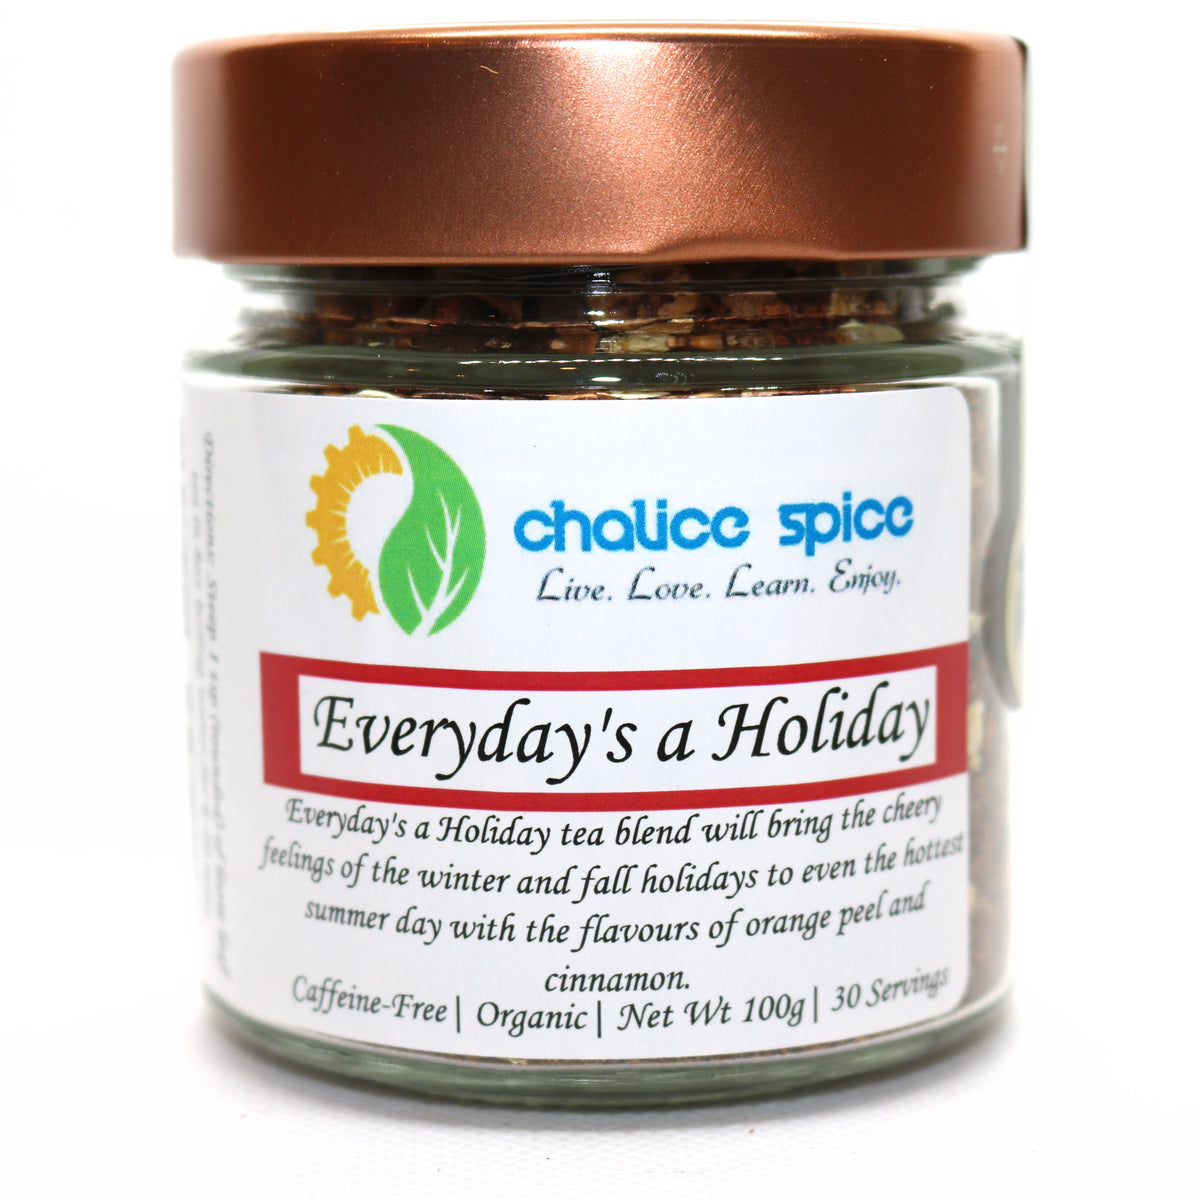 Chalice Spice Everyday’s a Holiday Organic Herbal Tea